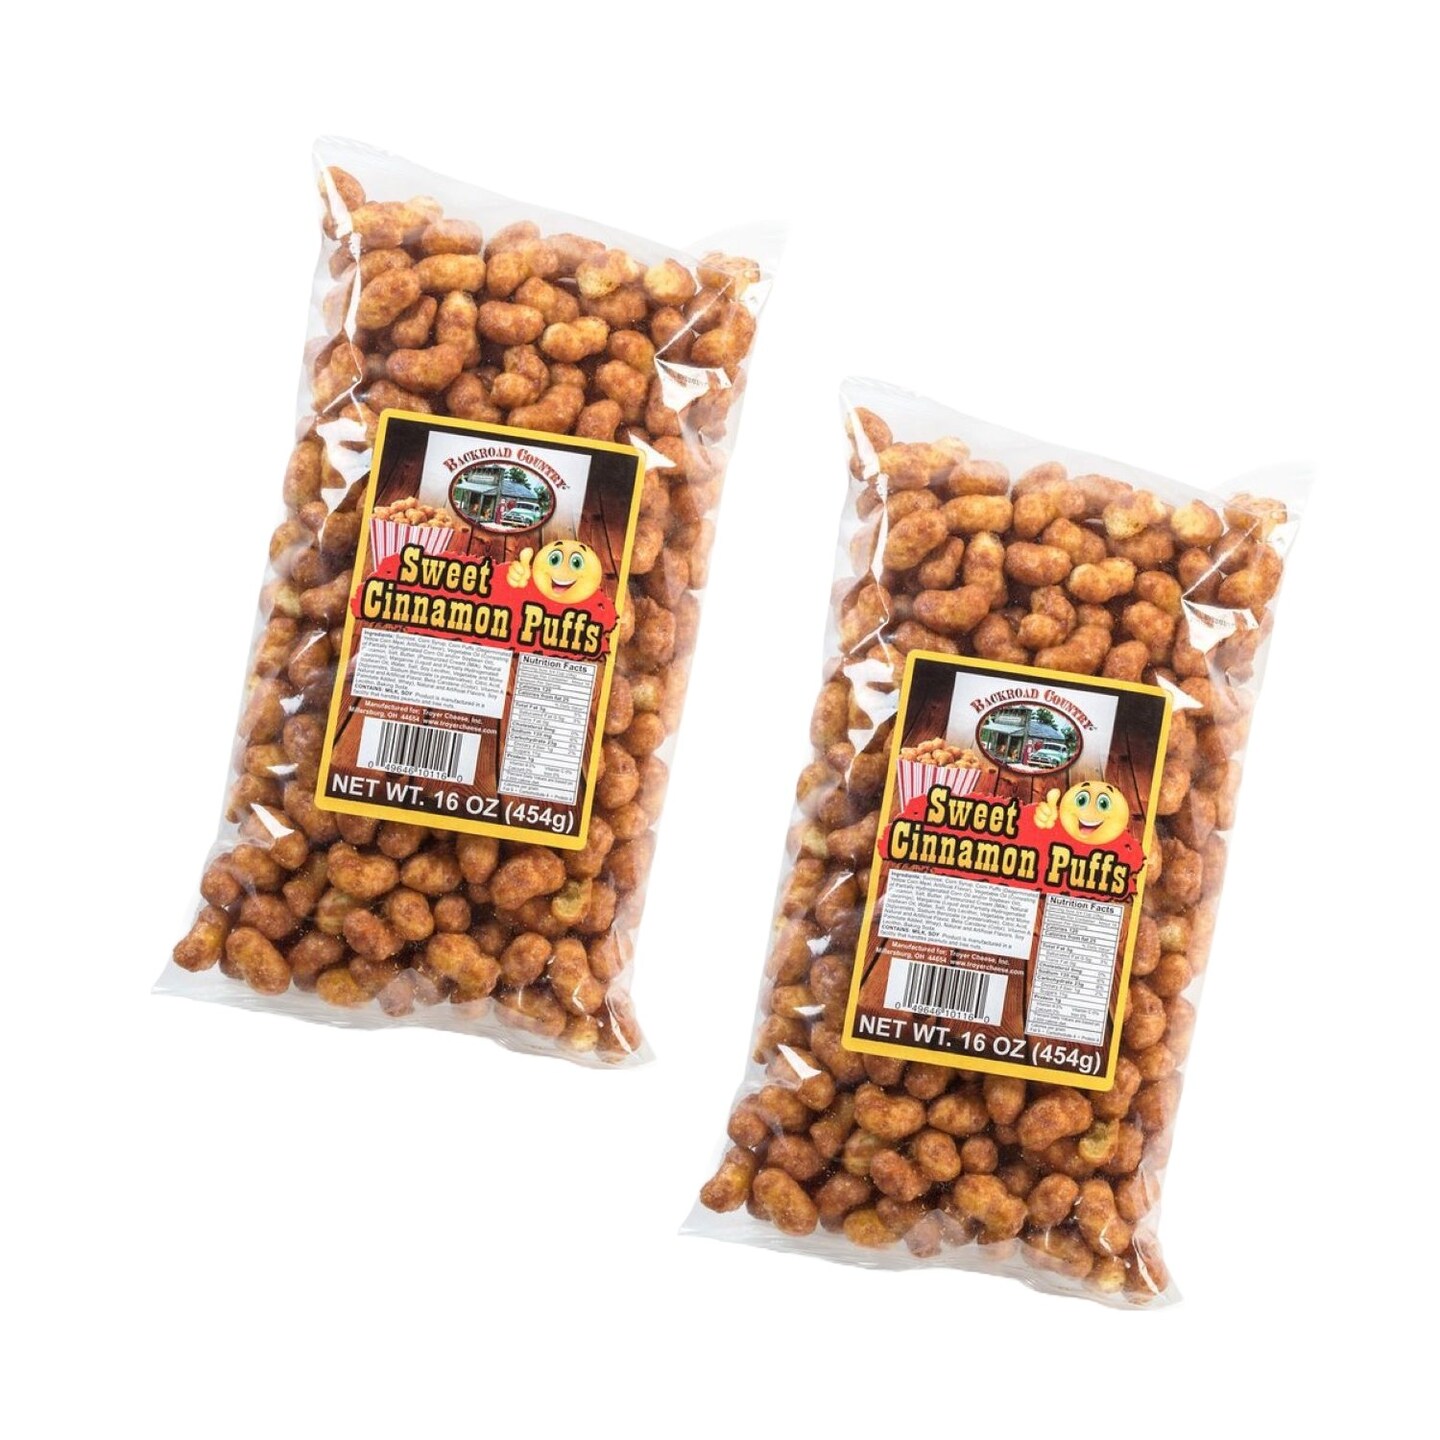 Backroad Country Sweet Cinnamon Puffs Old Fashioned Treat (Pack of 2) Puffcorn